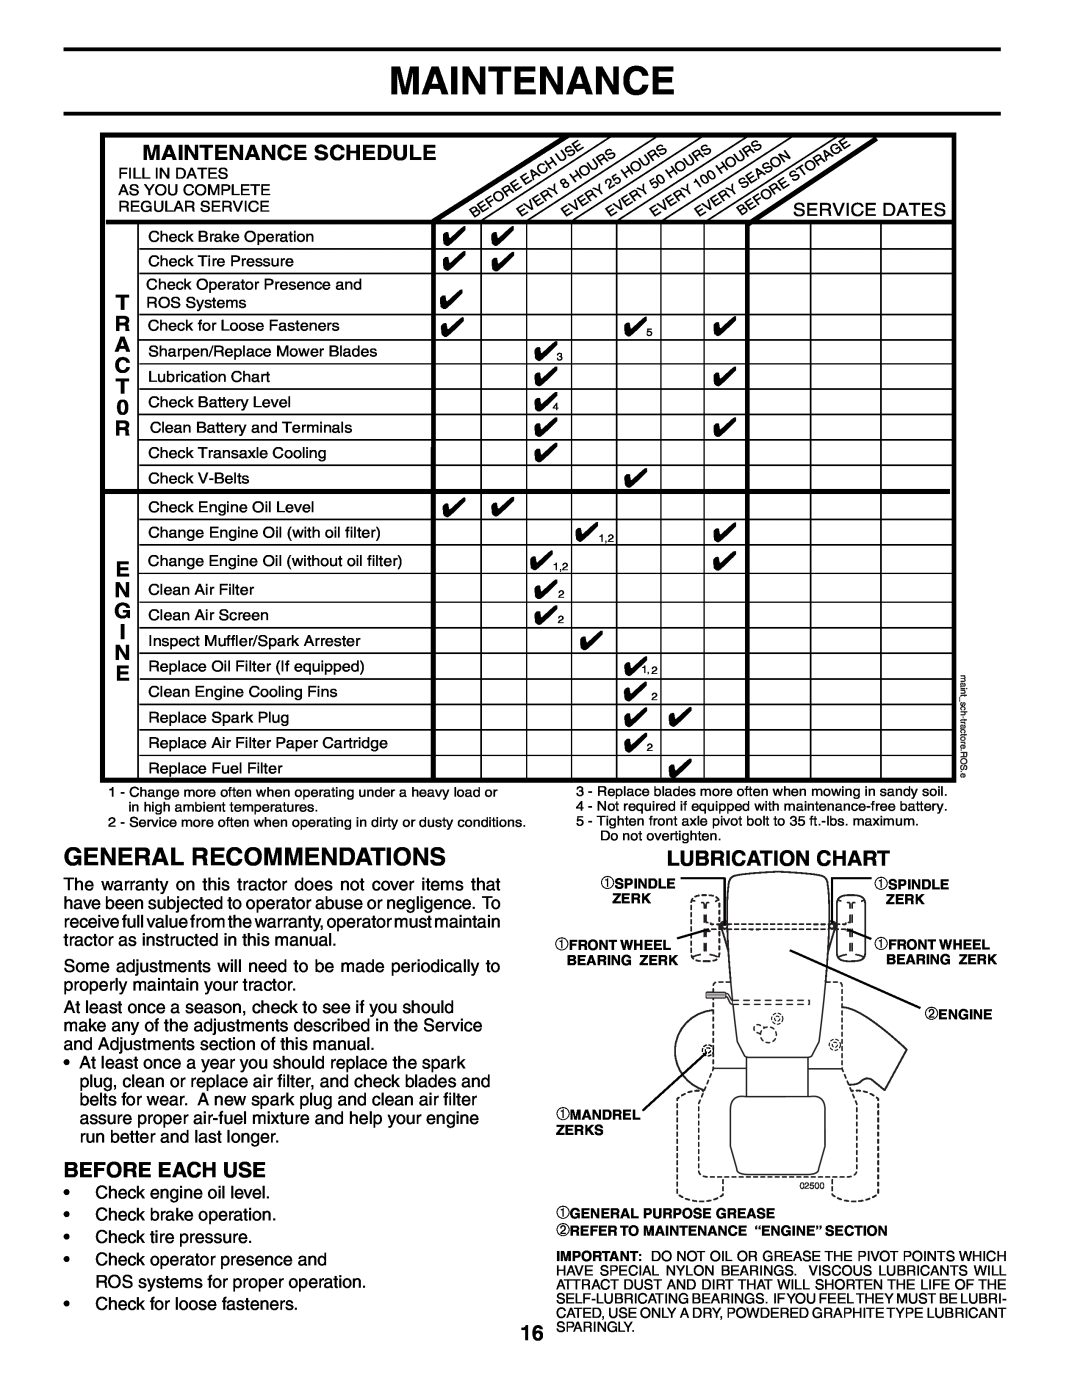 Poulan DB24H48YT manual General Recommendations, Lubrication Chart, Before Each Use, Maintenance Schedule 